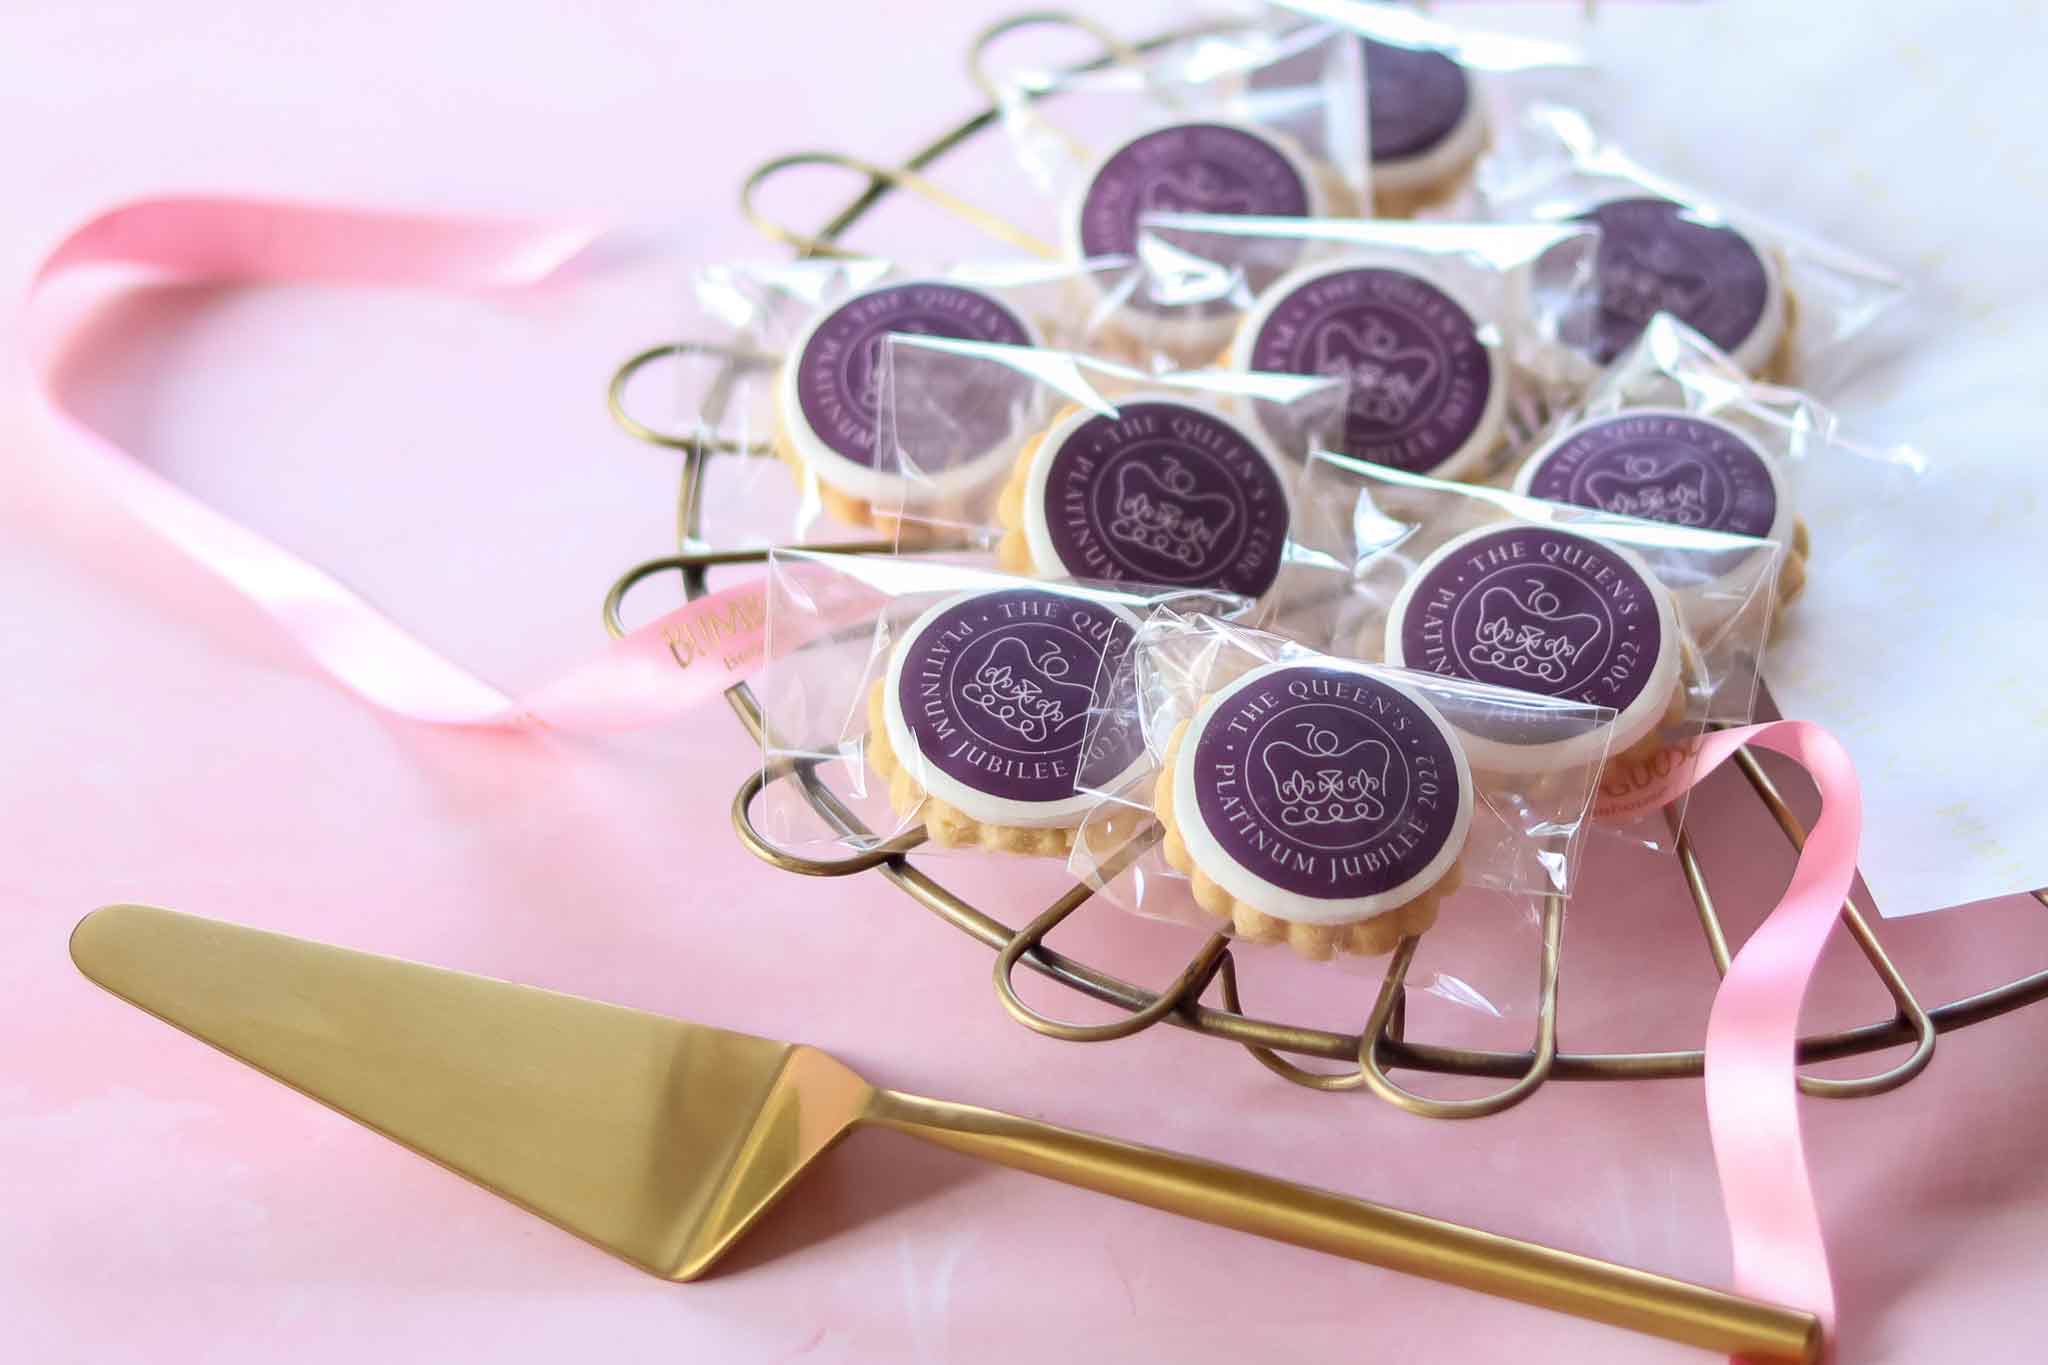 Individually Wrapped Platinum Jubilee Biscuits Gallery Image